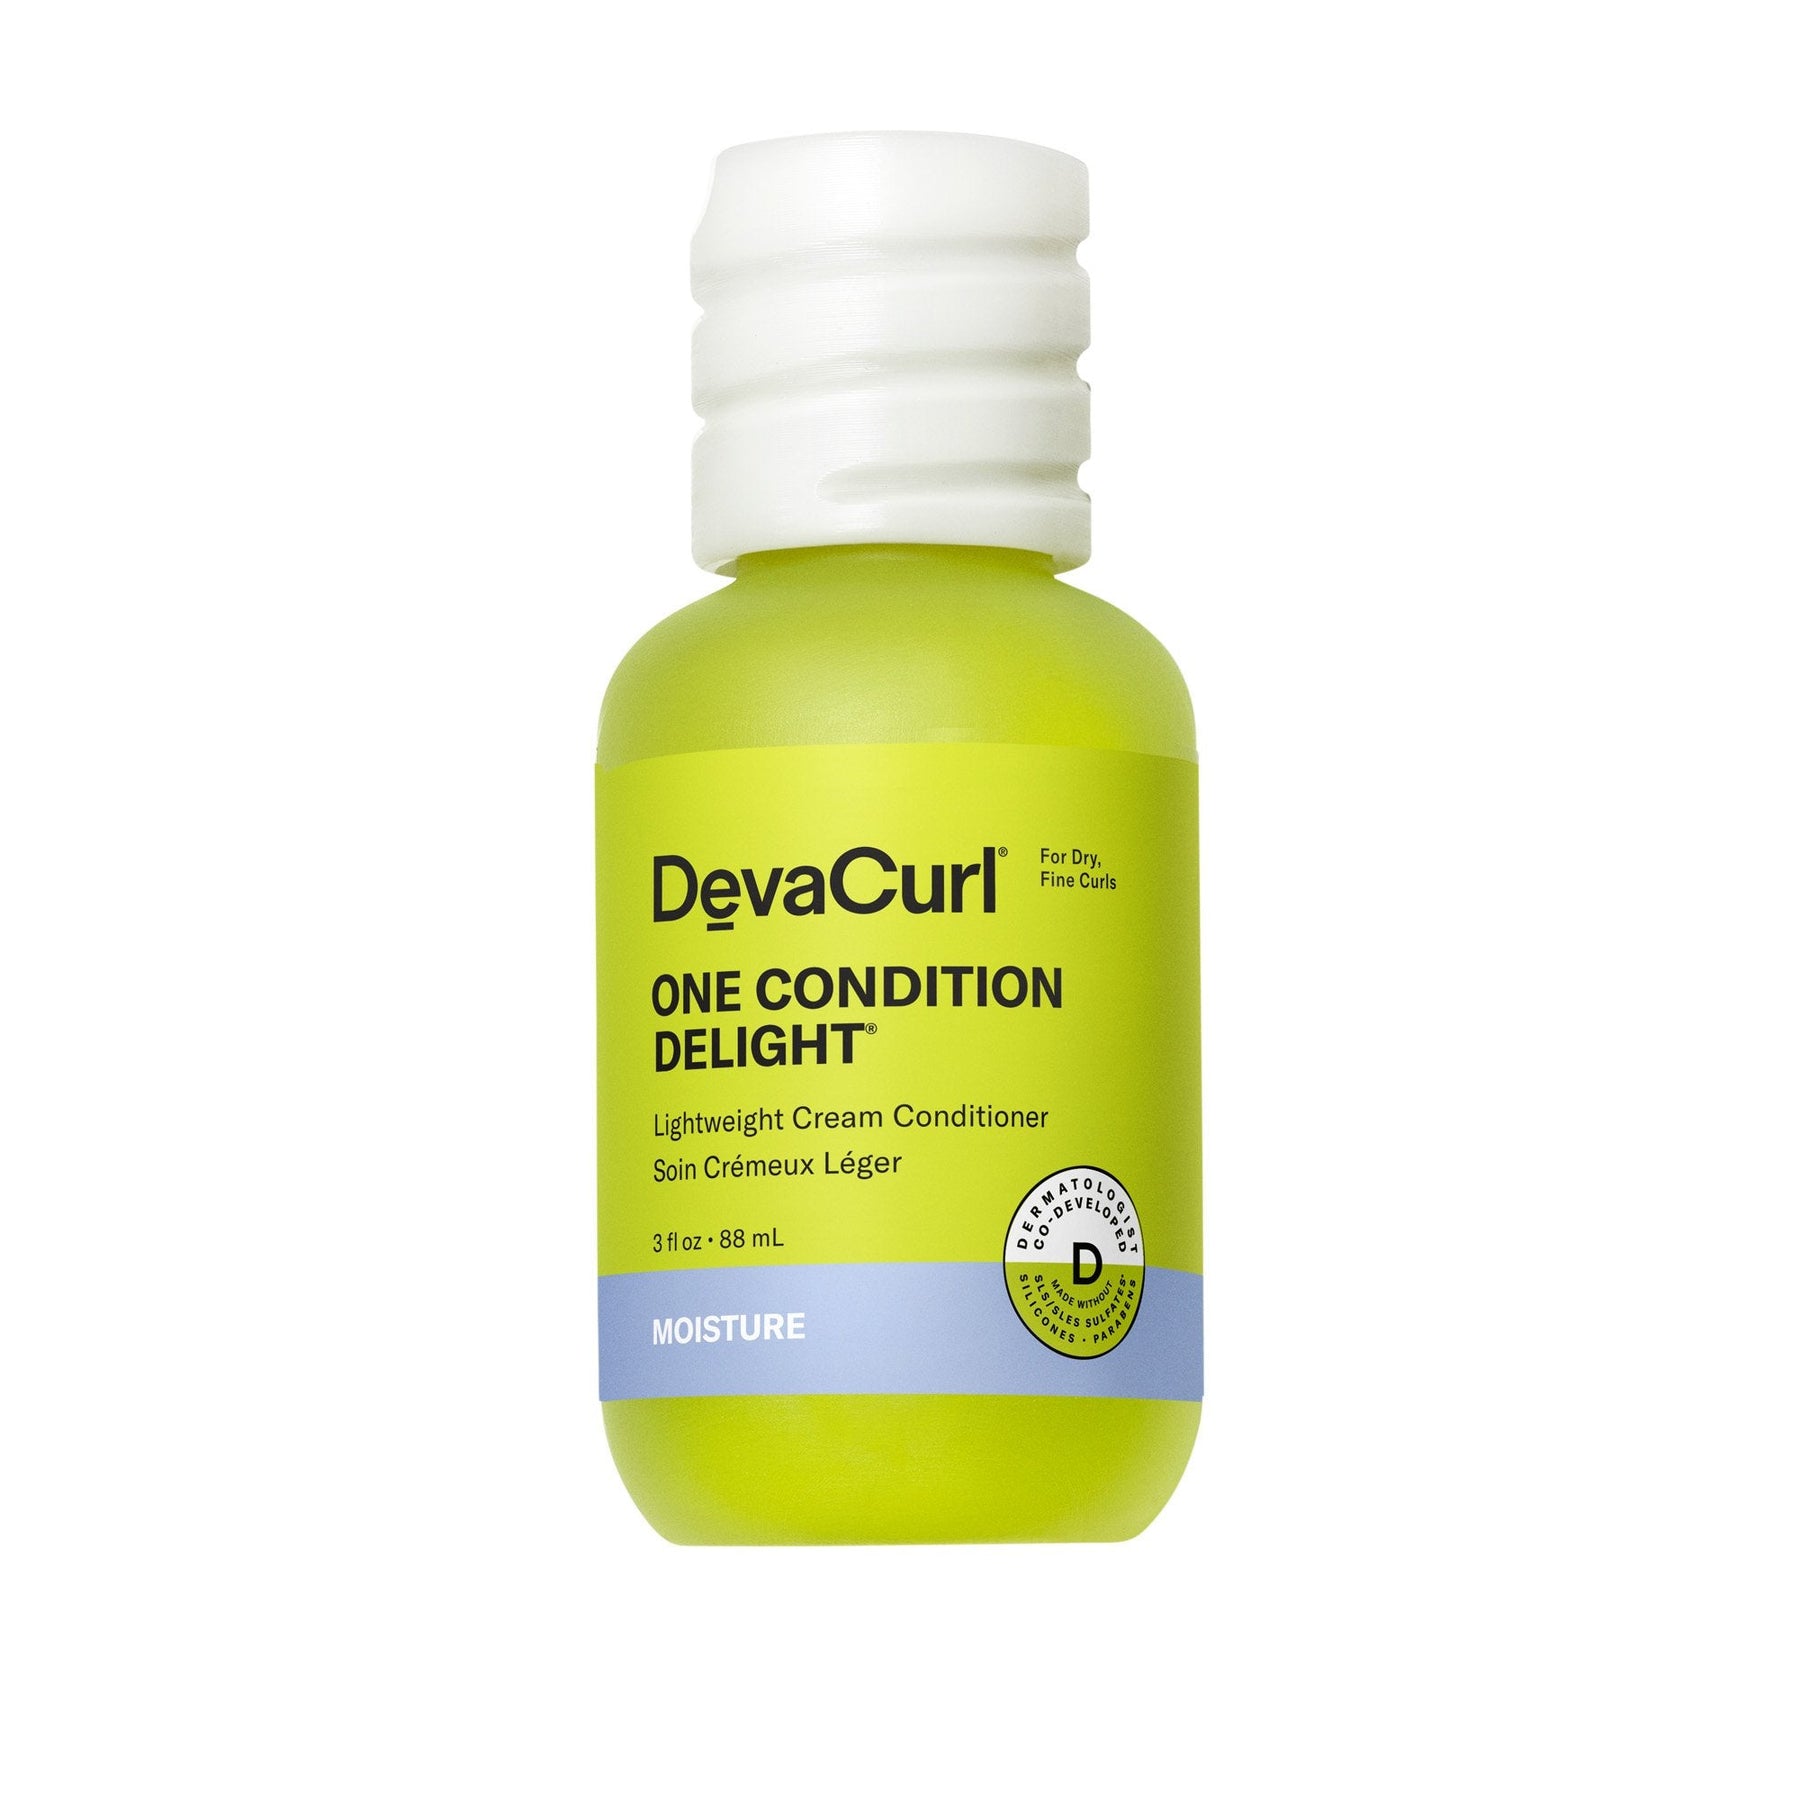 New! DevaCurl One Condition Delight - by Deva Curl |ProCare Outlet|